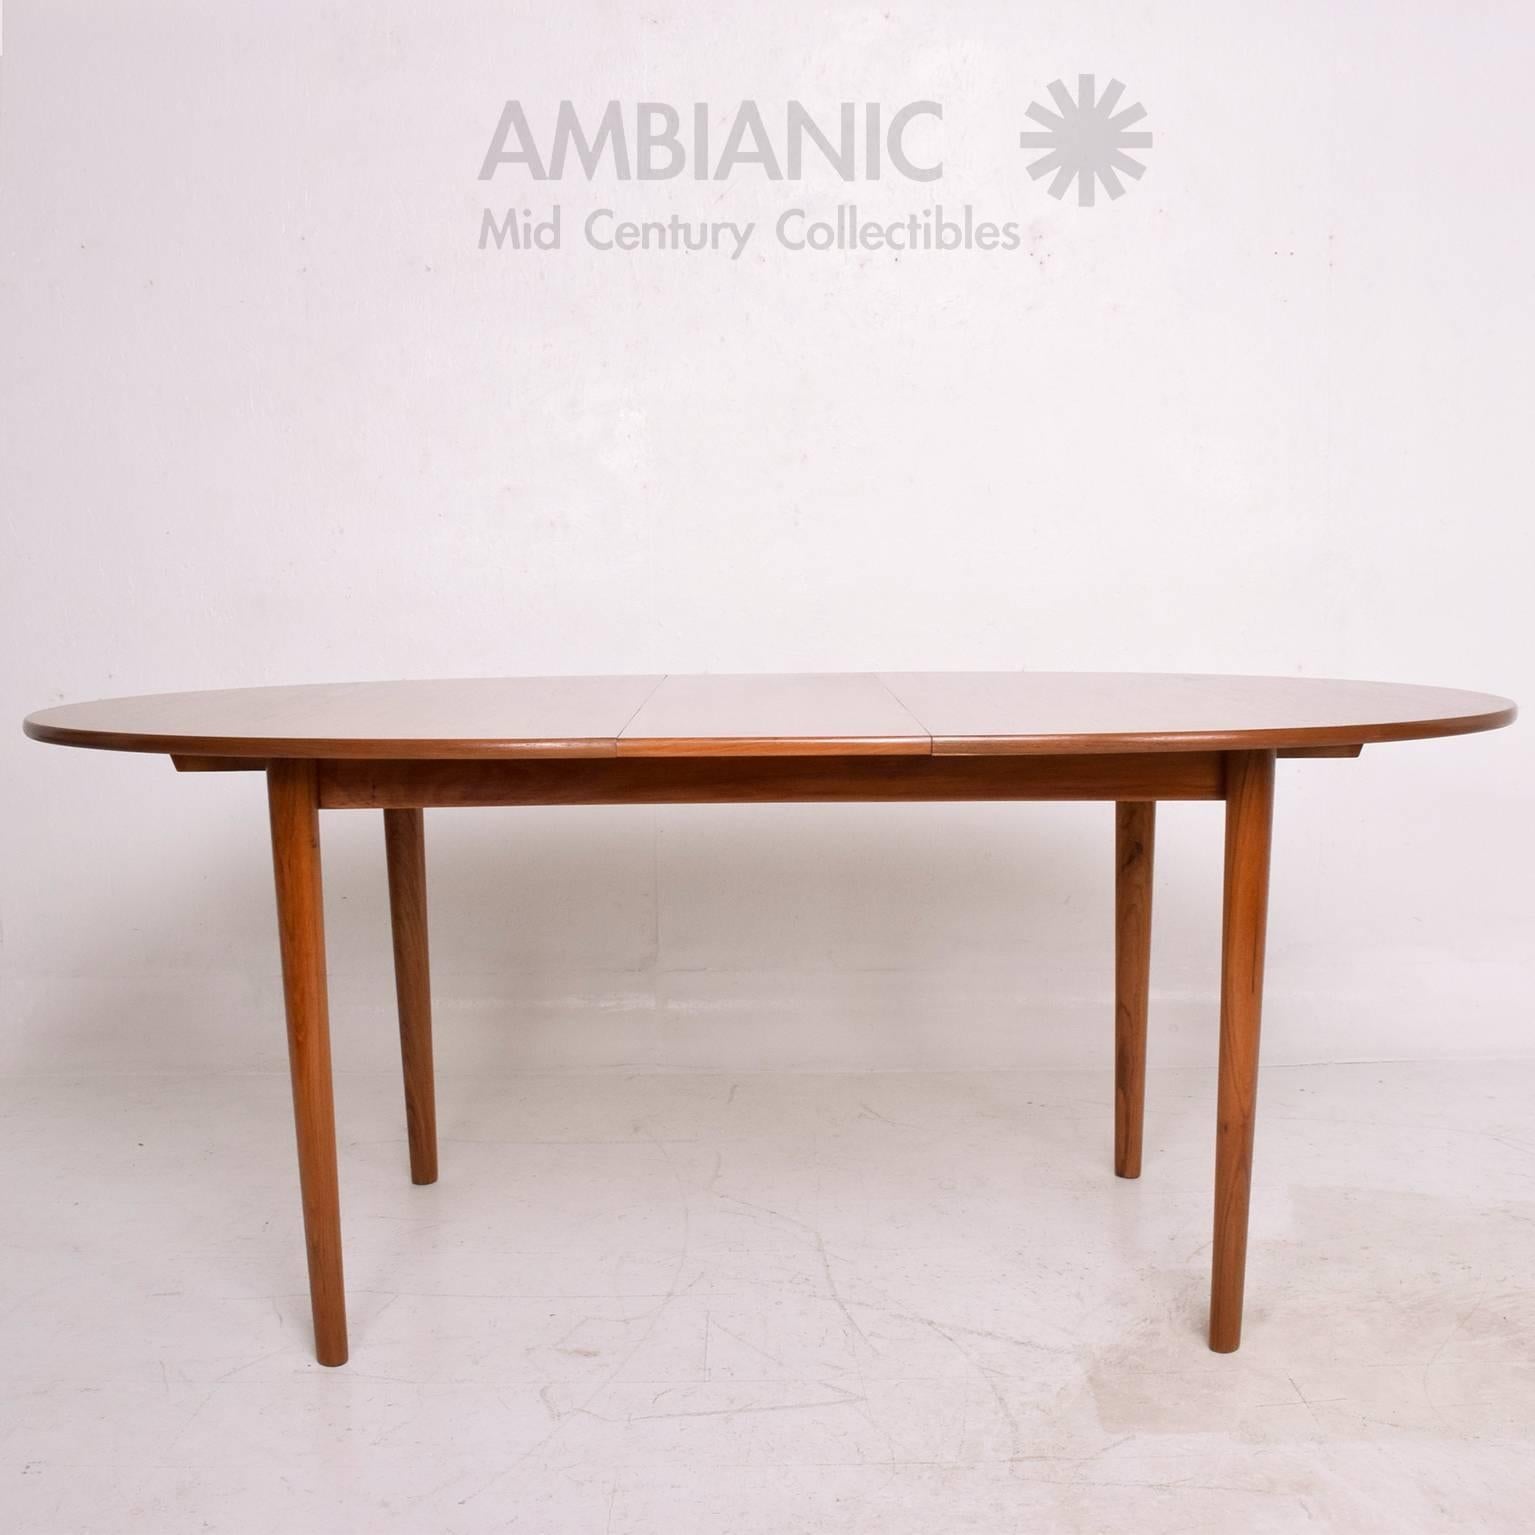 Mid-20th Century Danish Modern Teak Dining Table Oval Shape with Extensions